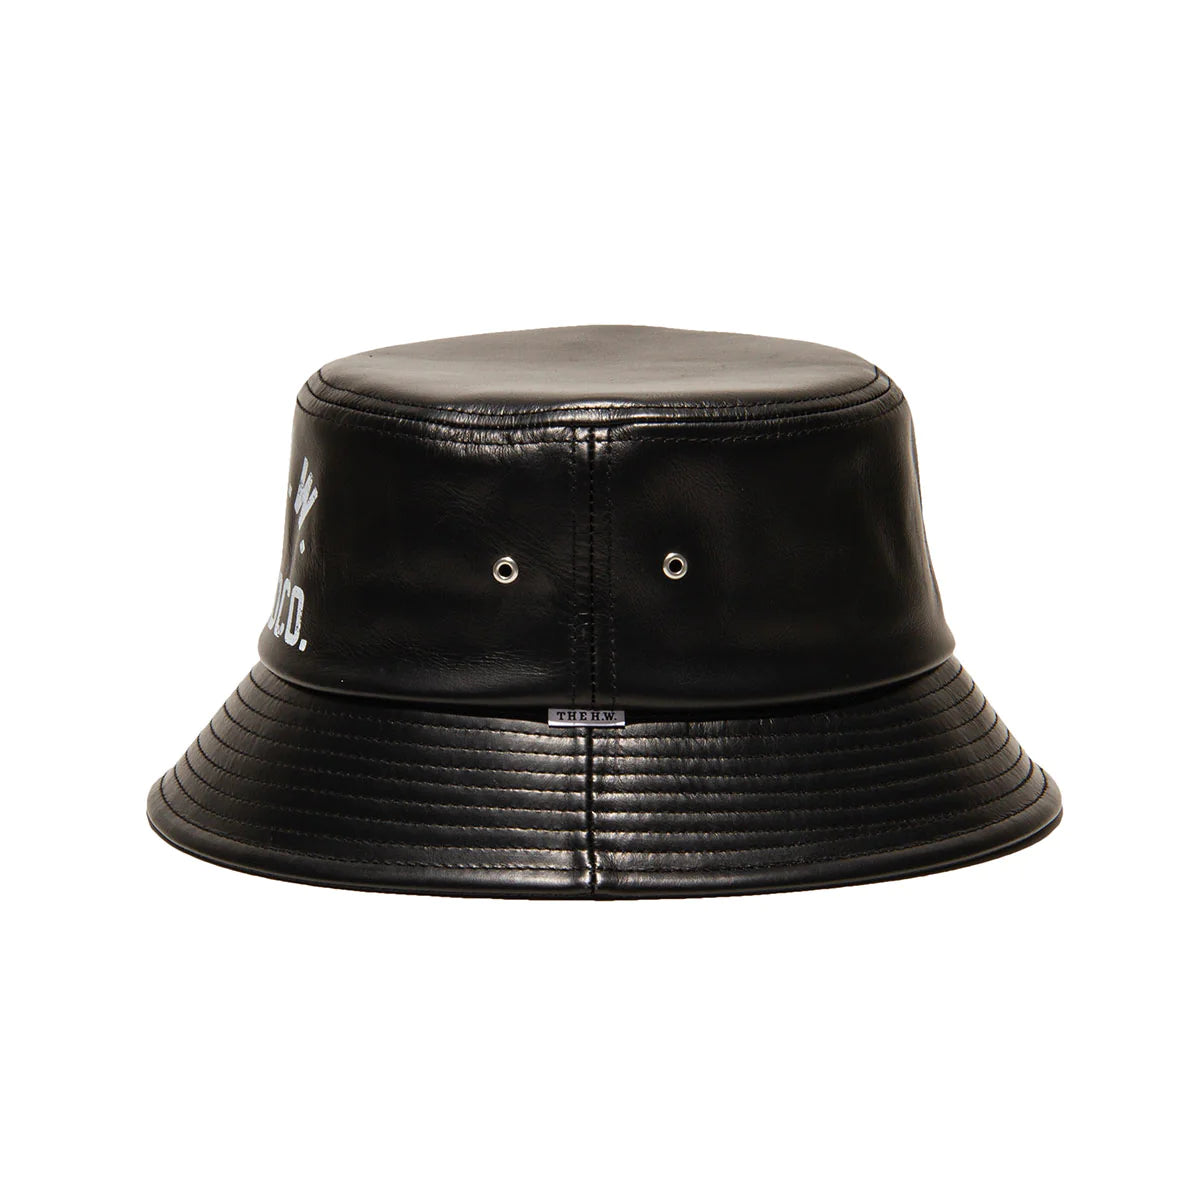 The H.W. Dog & Co - LEATHER HAT - Black